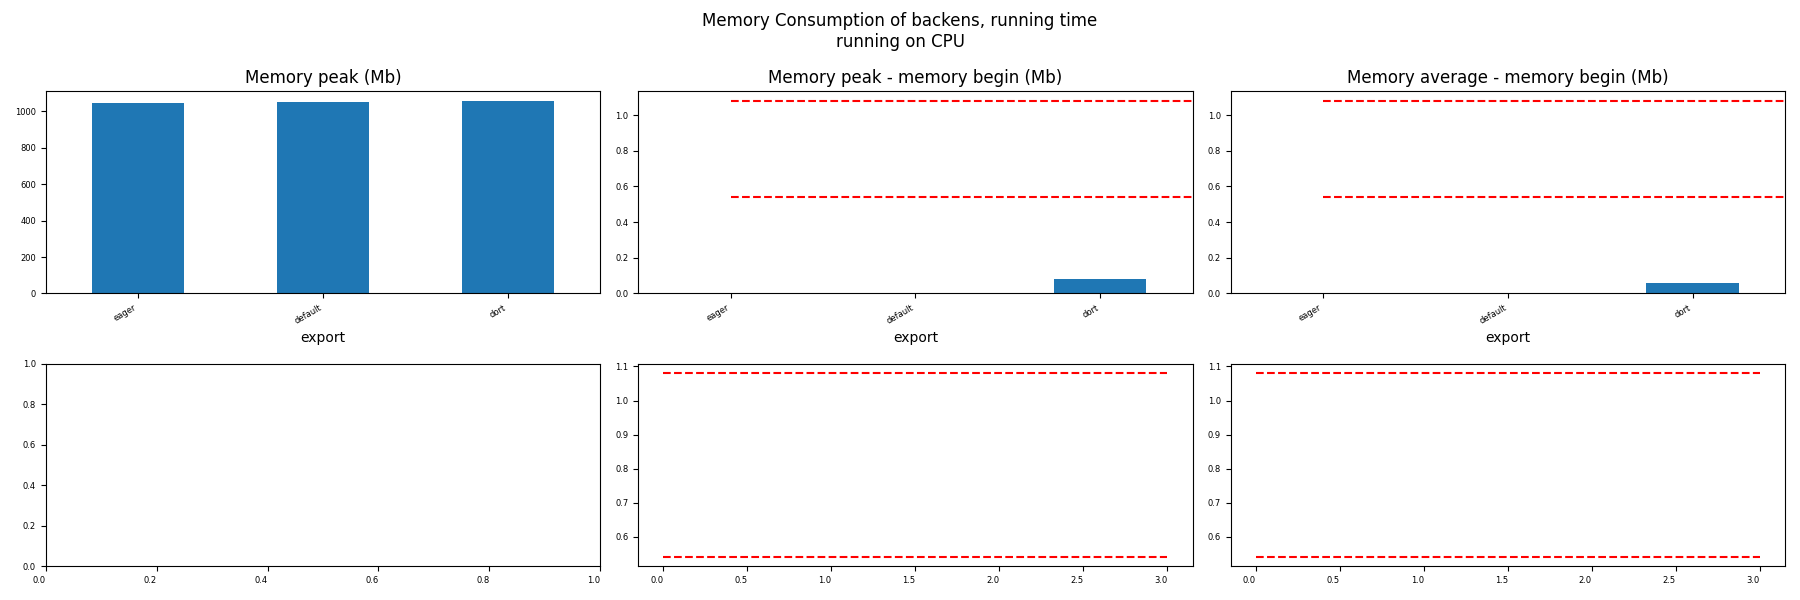 Memory Consumption of backens, running time running on CPU, Memory peak (Mb), Memory peak - memory begin (Mb), Memory average - memory begin (Mb)